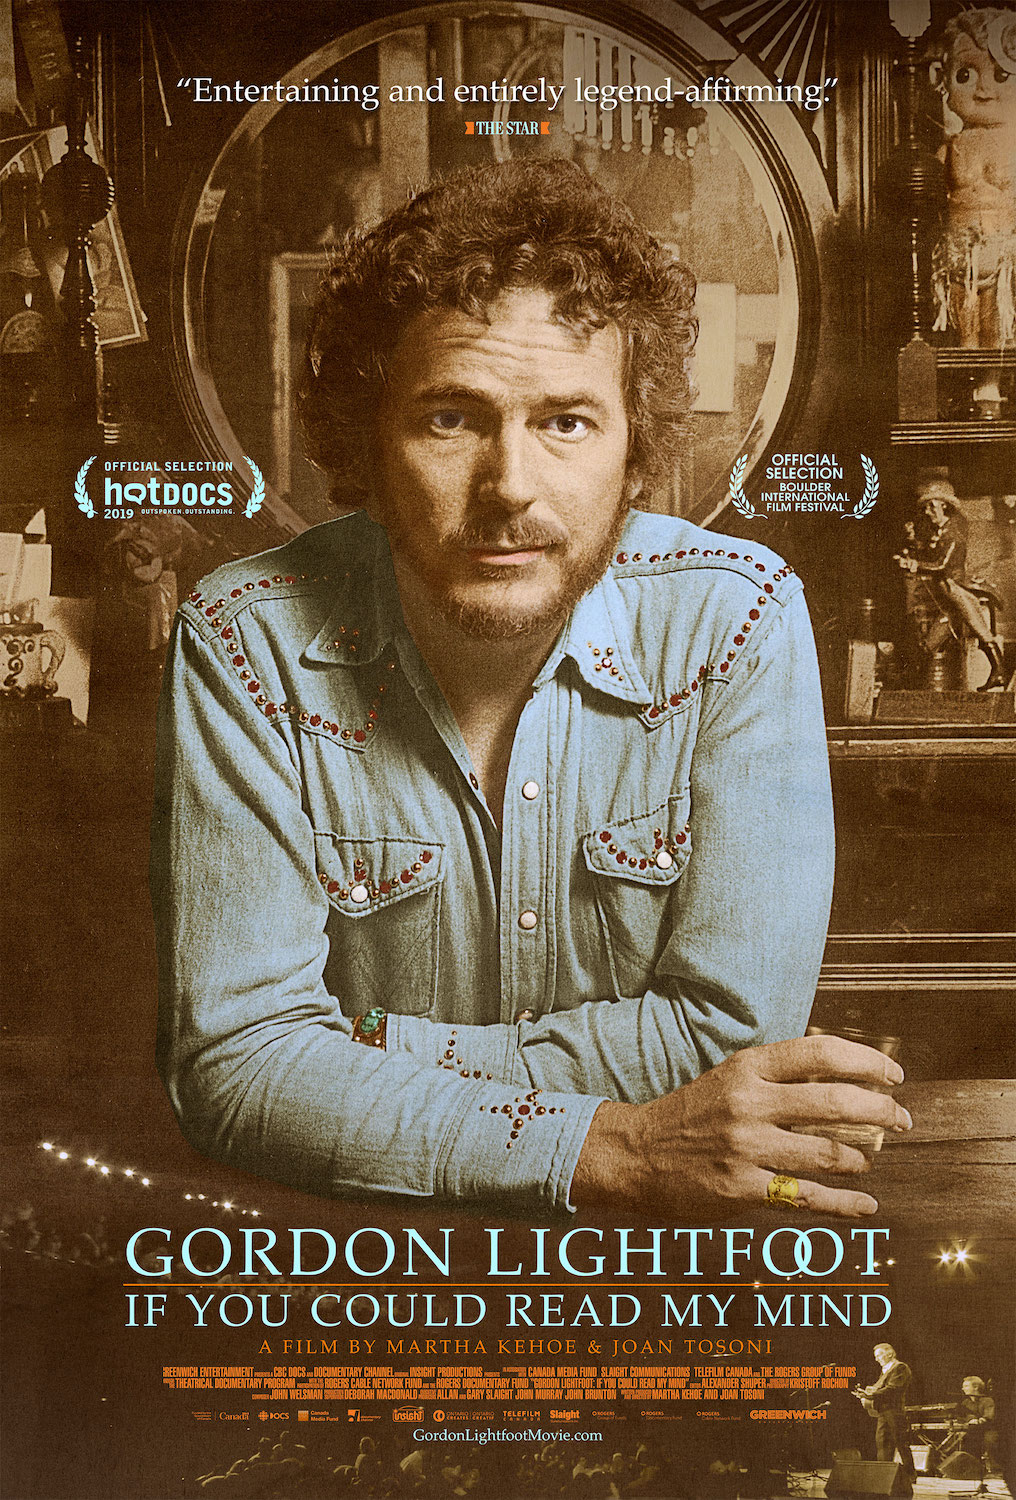 Film Review “Gordon Lightfoot If You Could Read My Mind” Shines Light